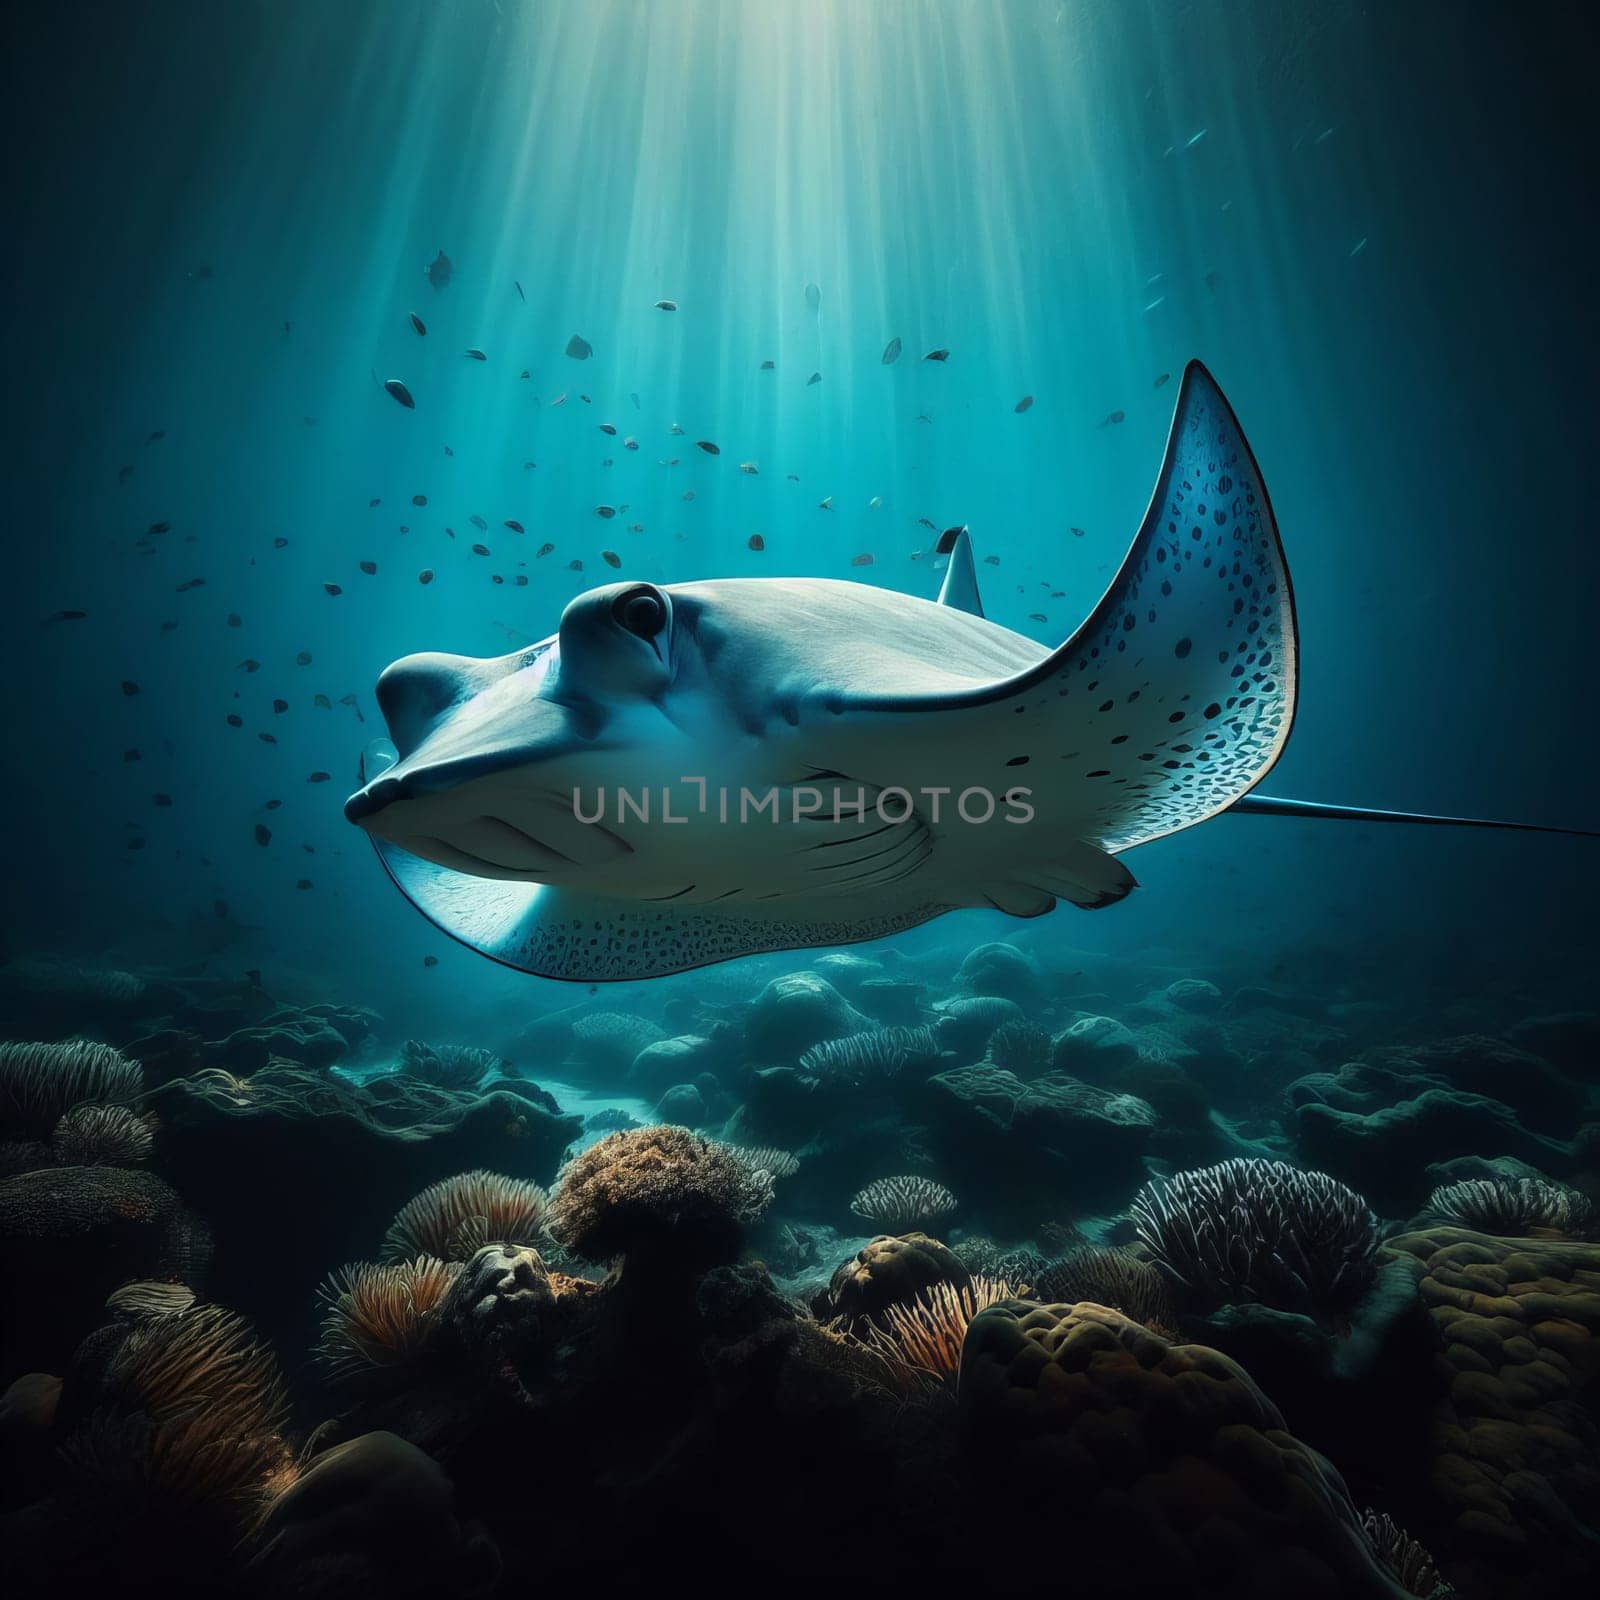 A stingray gracefully swims in the ocean, surrounded by a school of fish and coral, under the dreamy blue sea. by sfinks